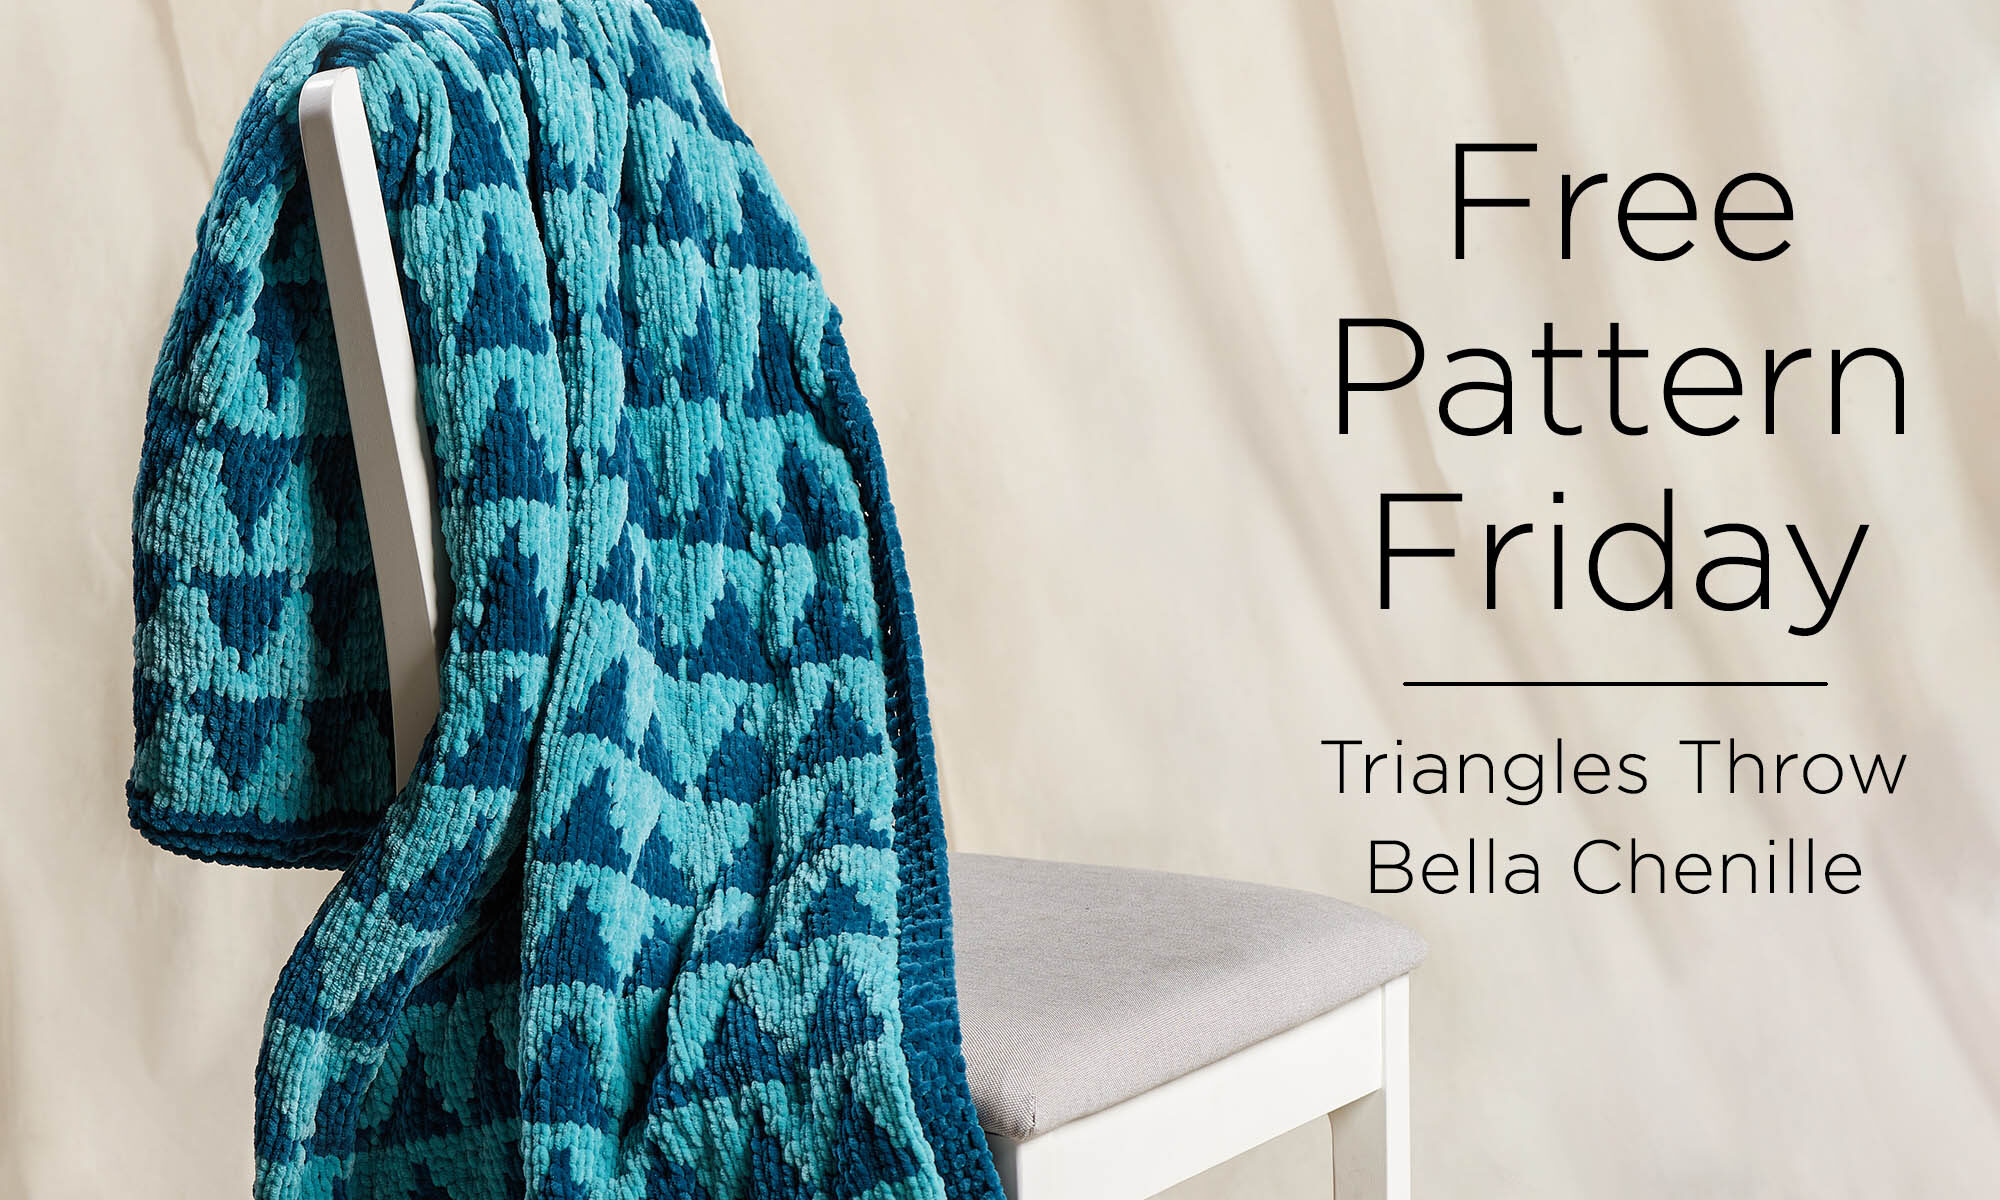 Aqua chenille knitted throw with triangle motif. Text reads: Free Pattern Friday, Triangles Throw in Bella Chenille